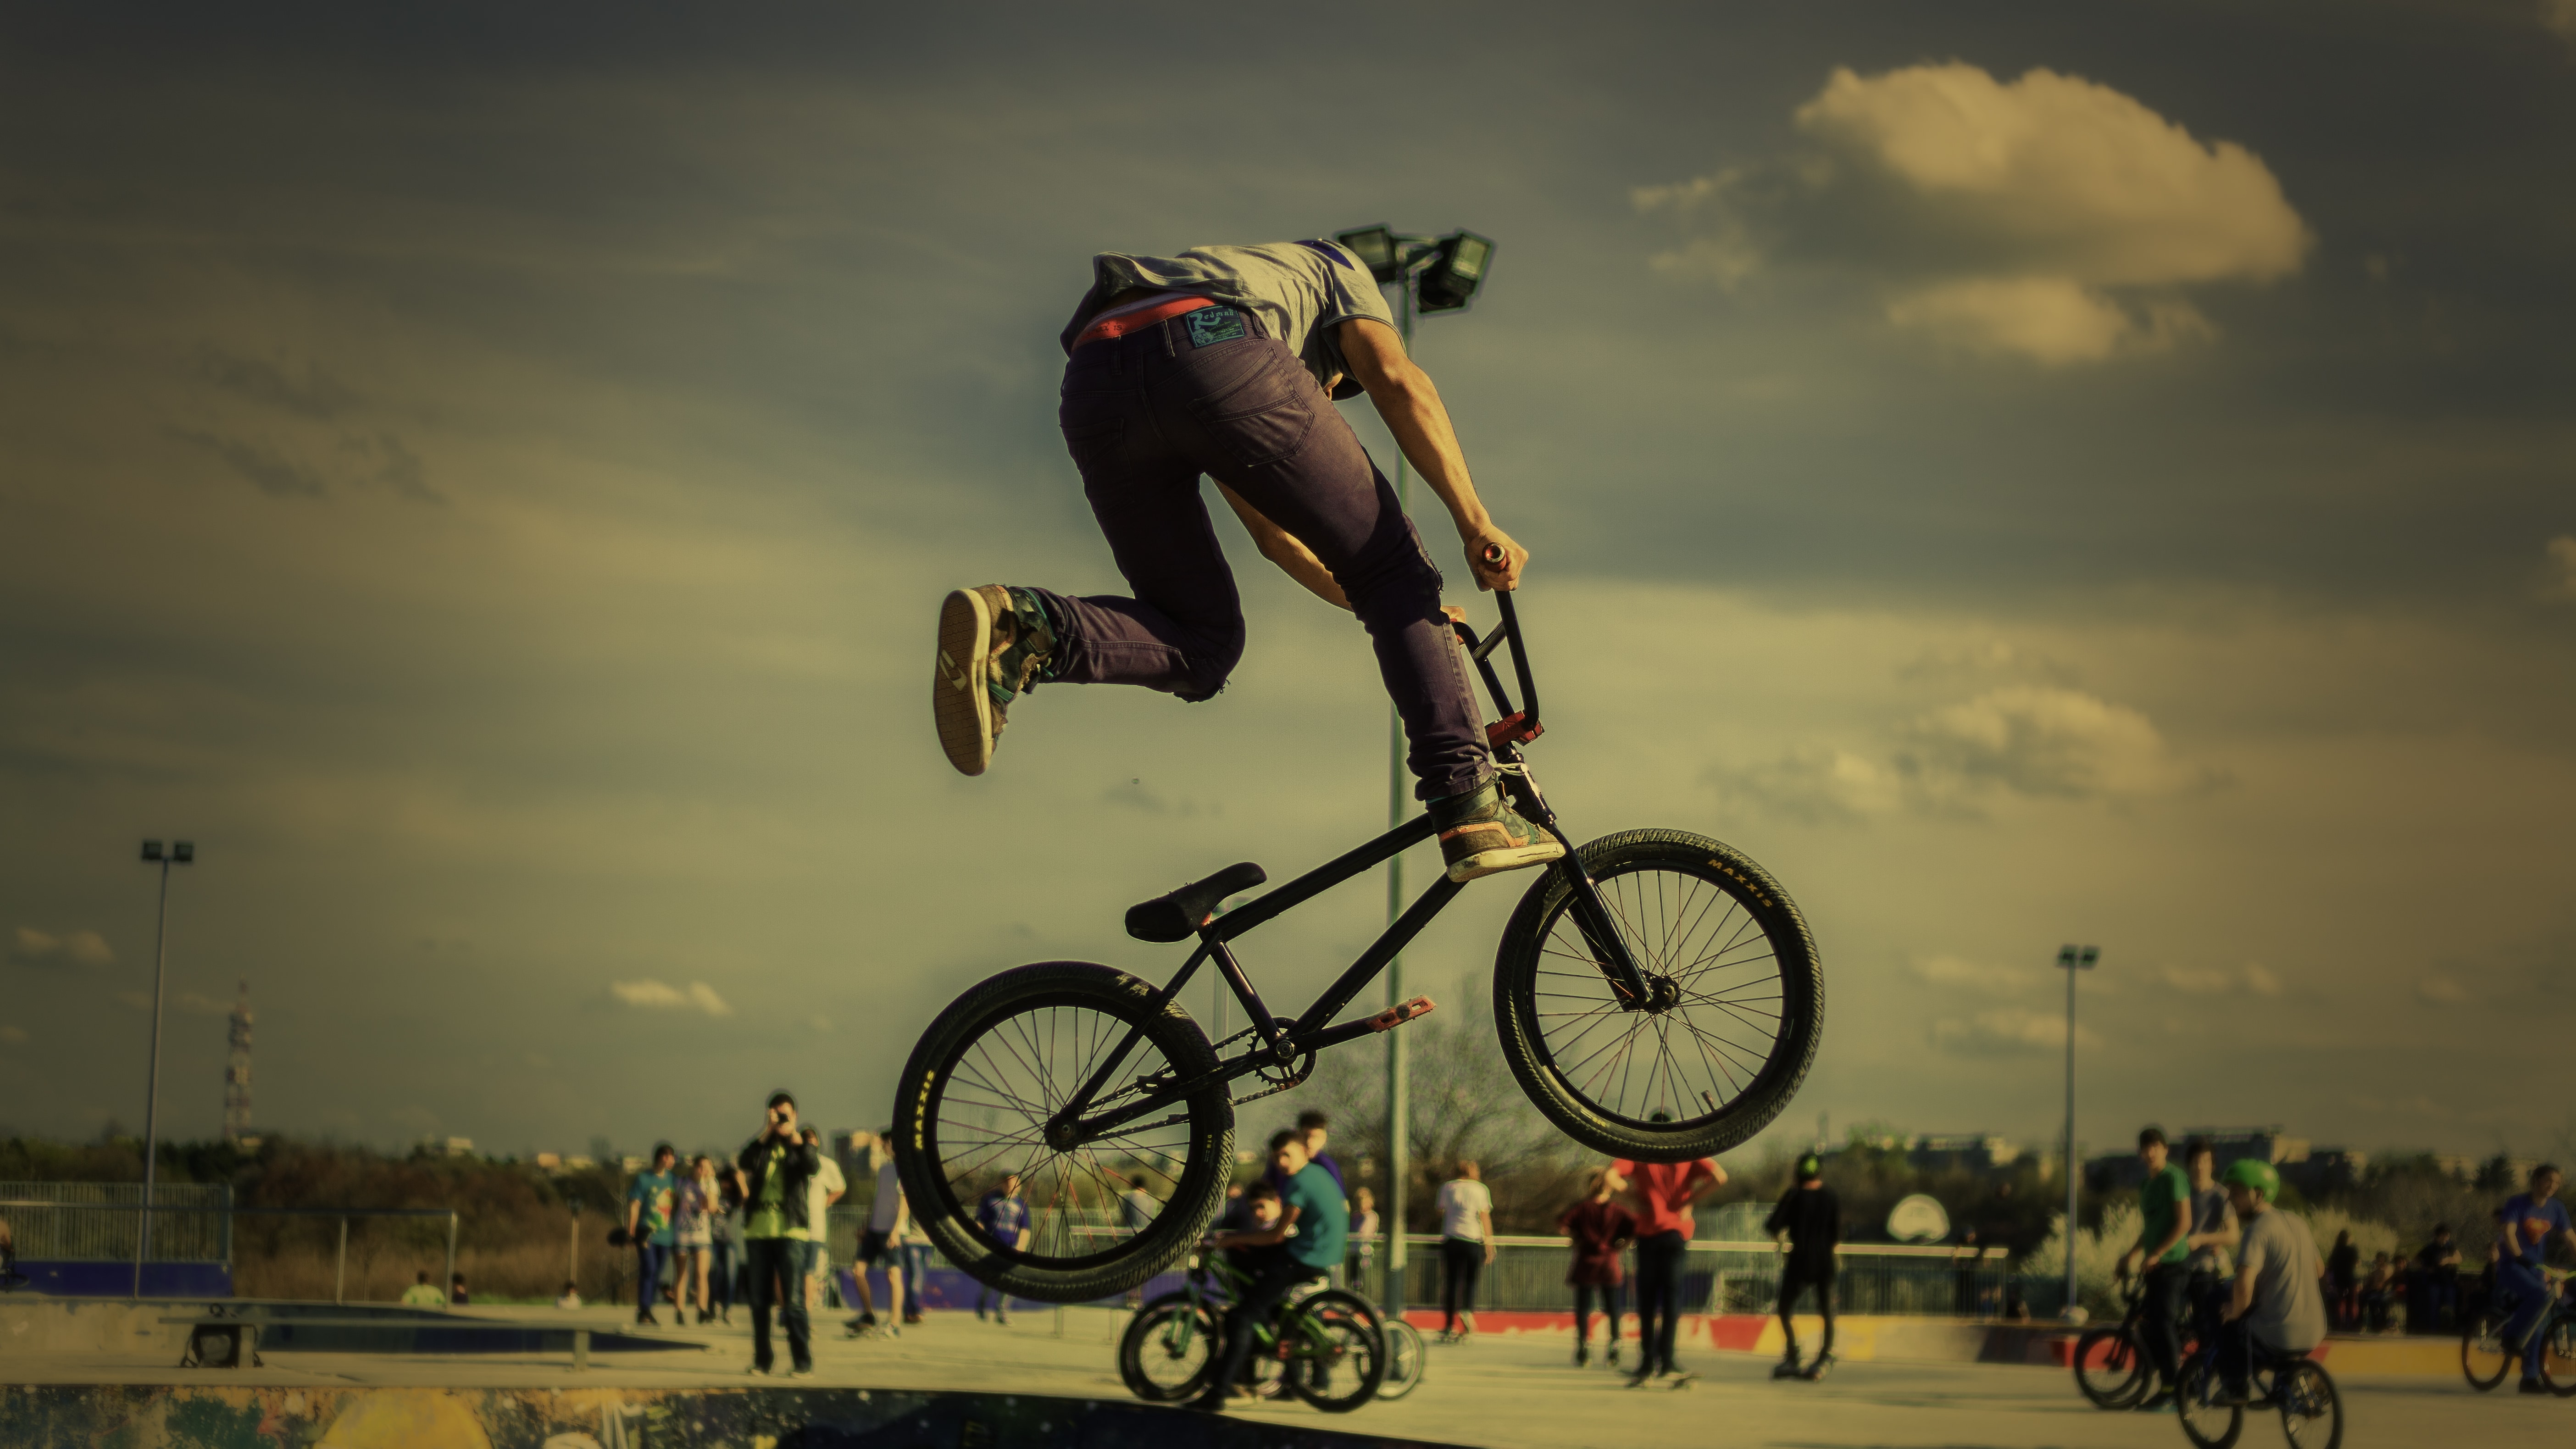 Boy Riding Black Bmx Bike Doing Exhibitions At Daytime - Boy With Cycle , HD Wallpaper & Backgrounds